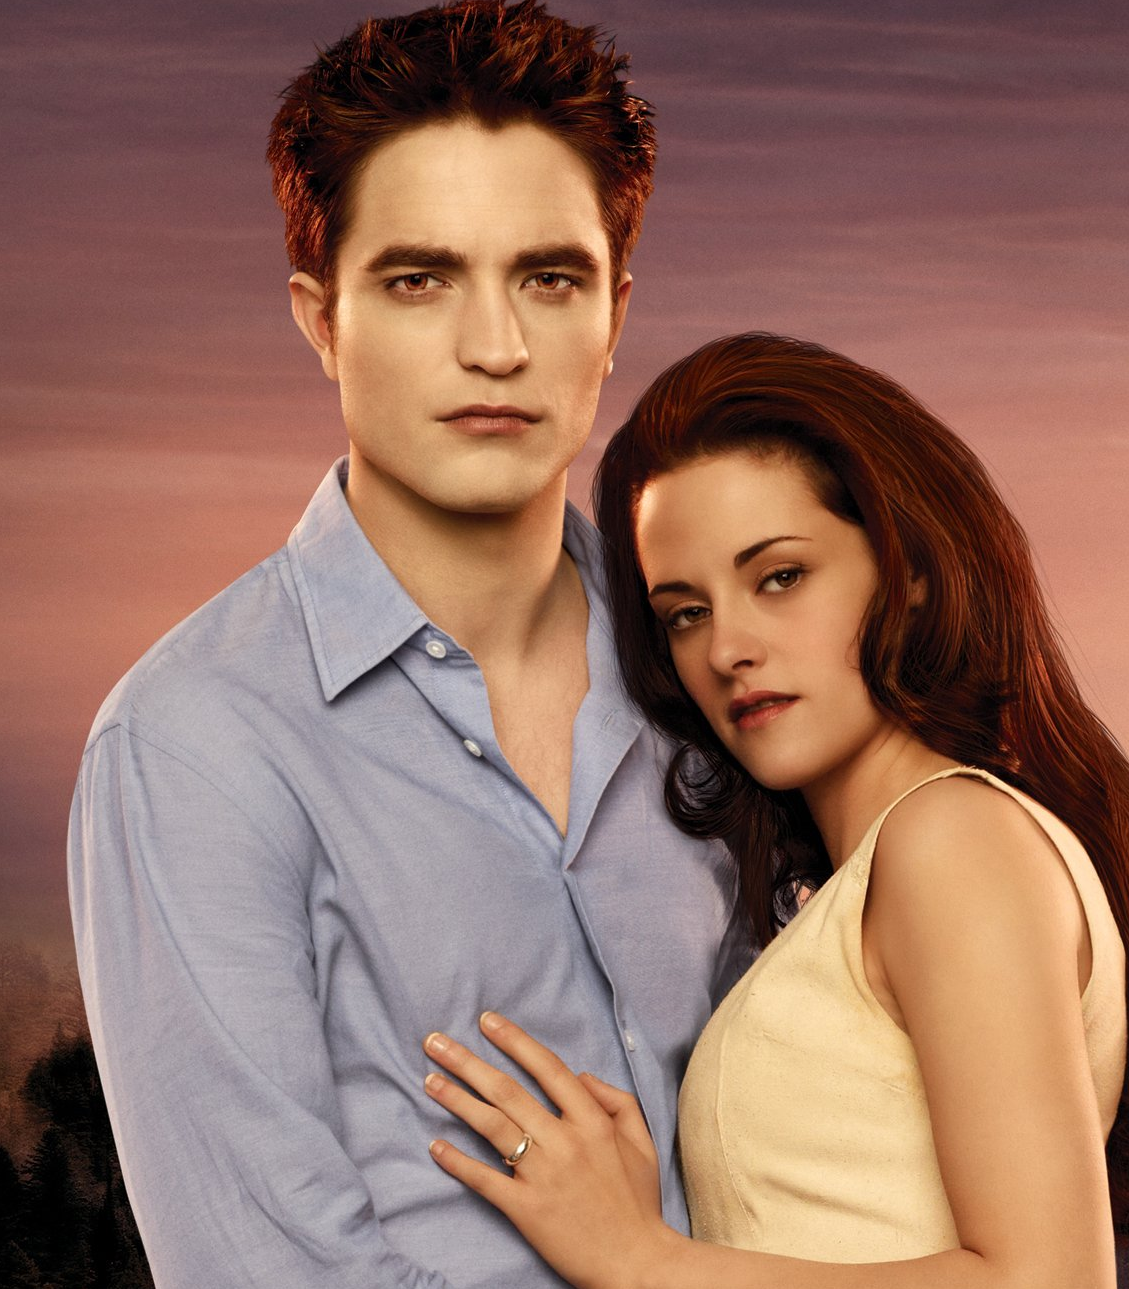 Edward and Bella Images on Fanpop.